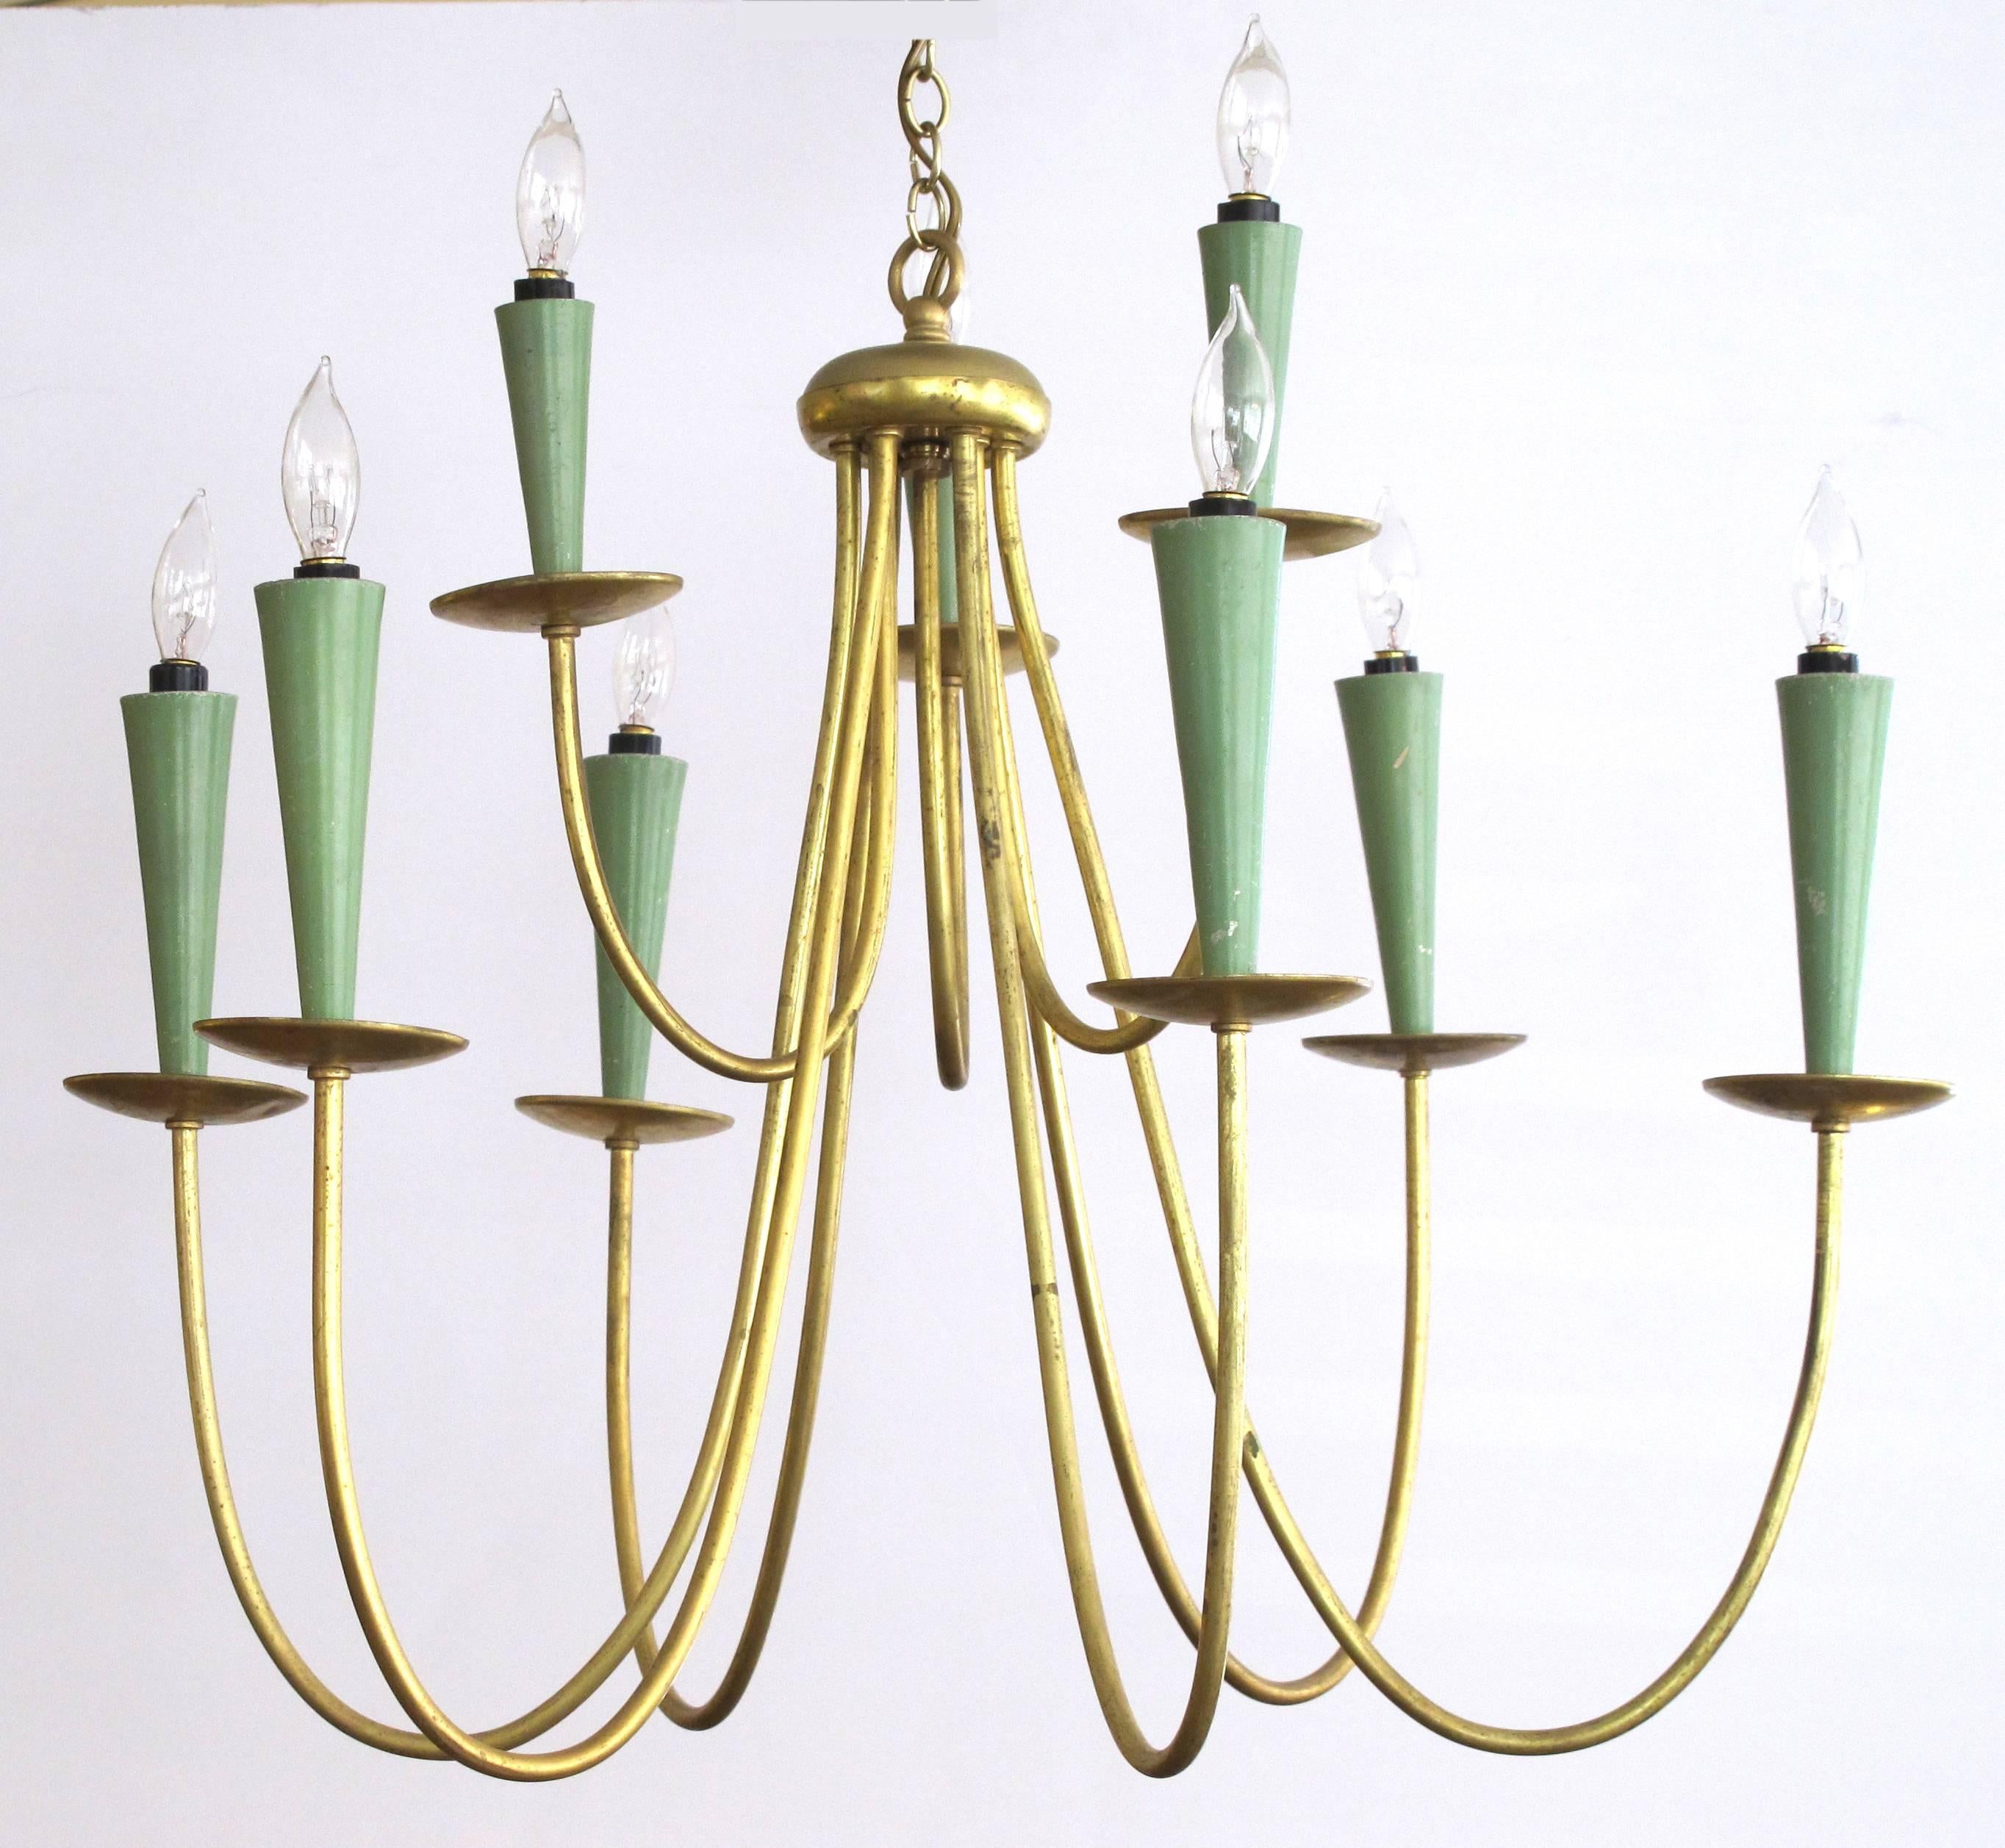 A chic Italian gilt and painted metal nine-arm chandelier; the central hub supporting nine swooping gilt-metal arms ending in gilt-metal bobeches and green-painted conical-shaped candle sleeves.